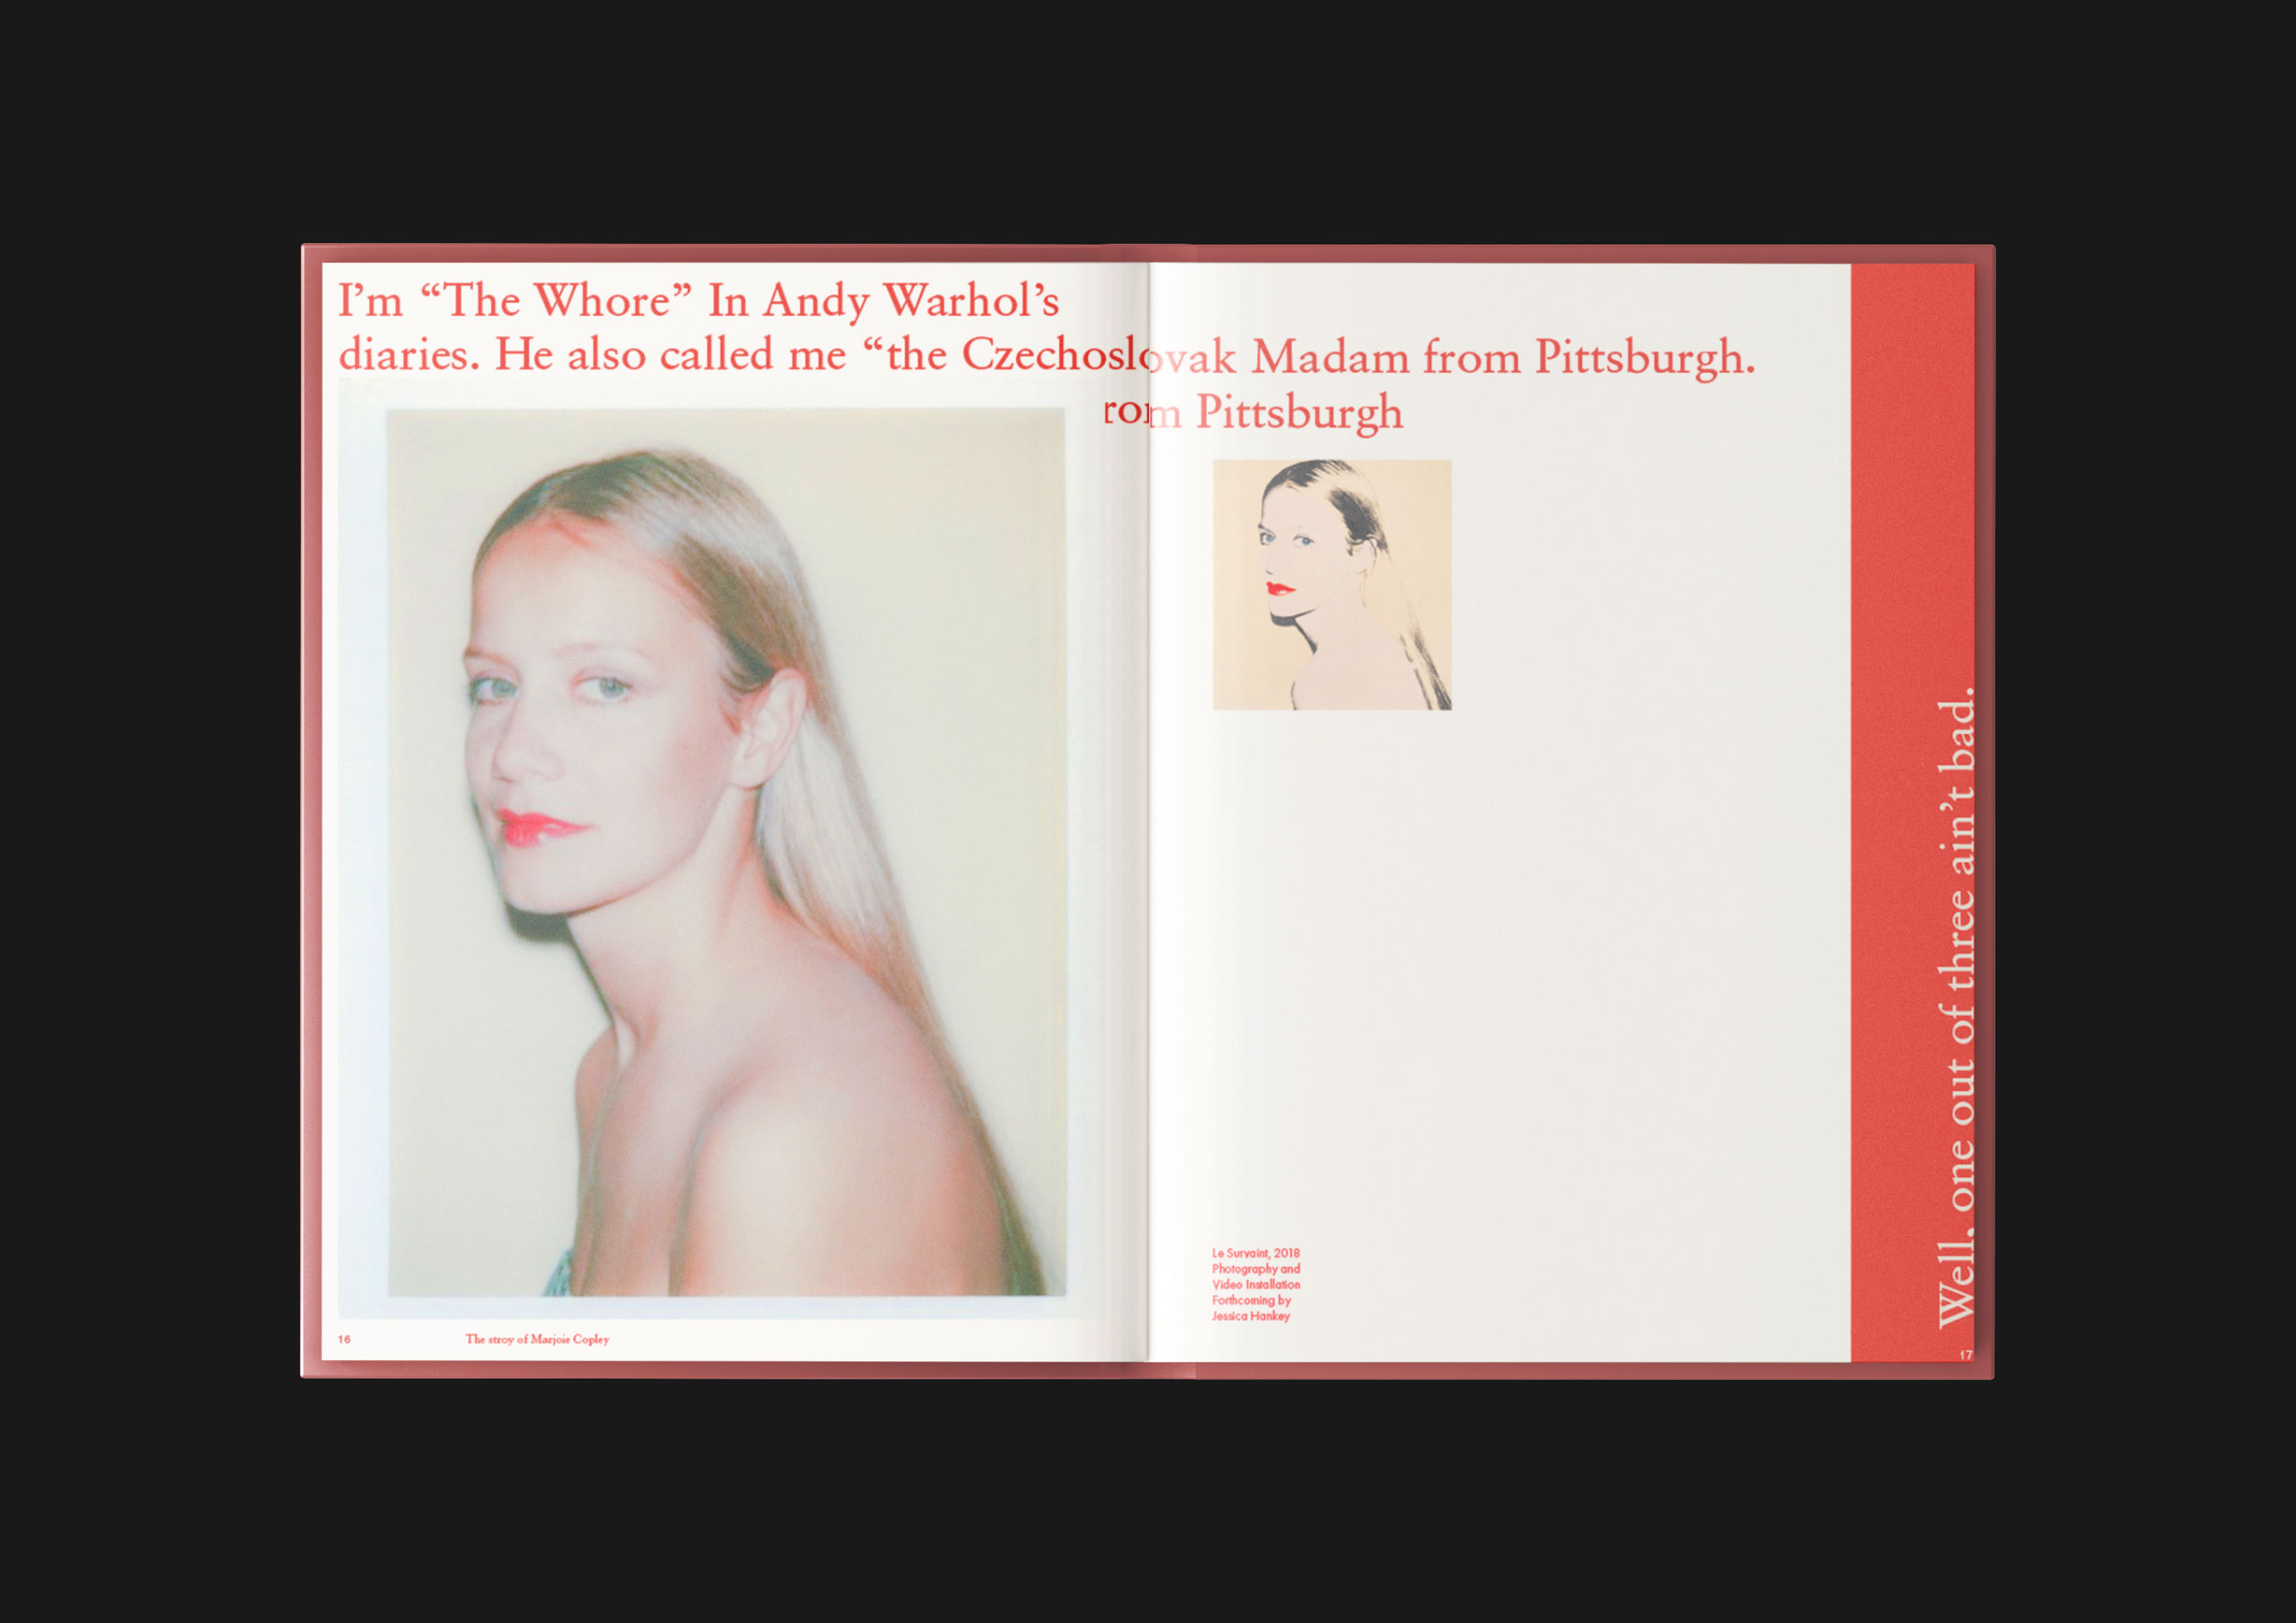 Warhol Women book proposal: Captivating story of Majorie Copley, an Andy Warhol muse. Opening spread sets tone for exploration of intriguing tales.